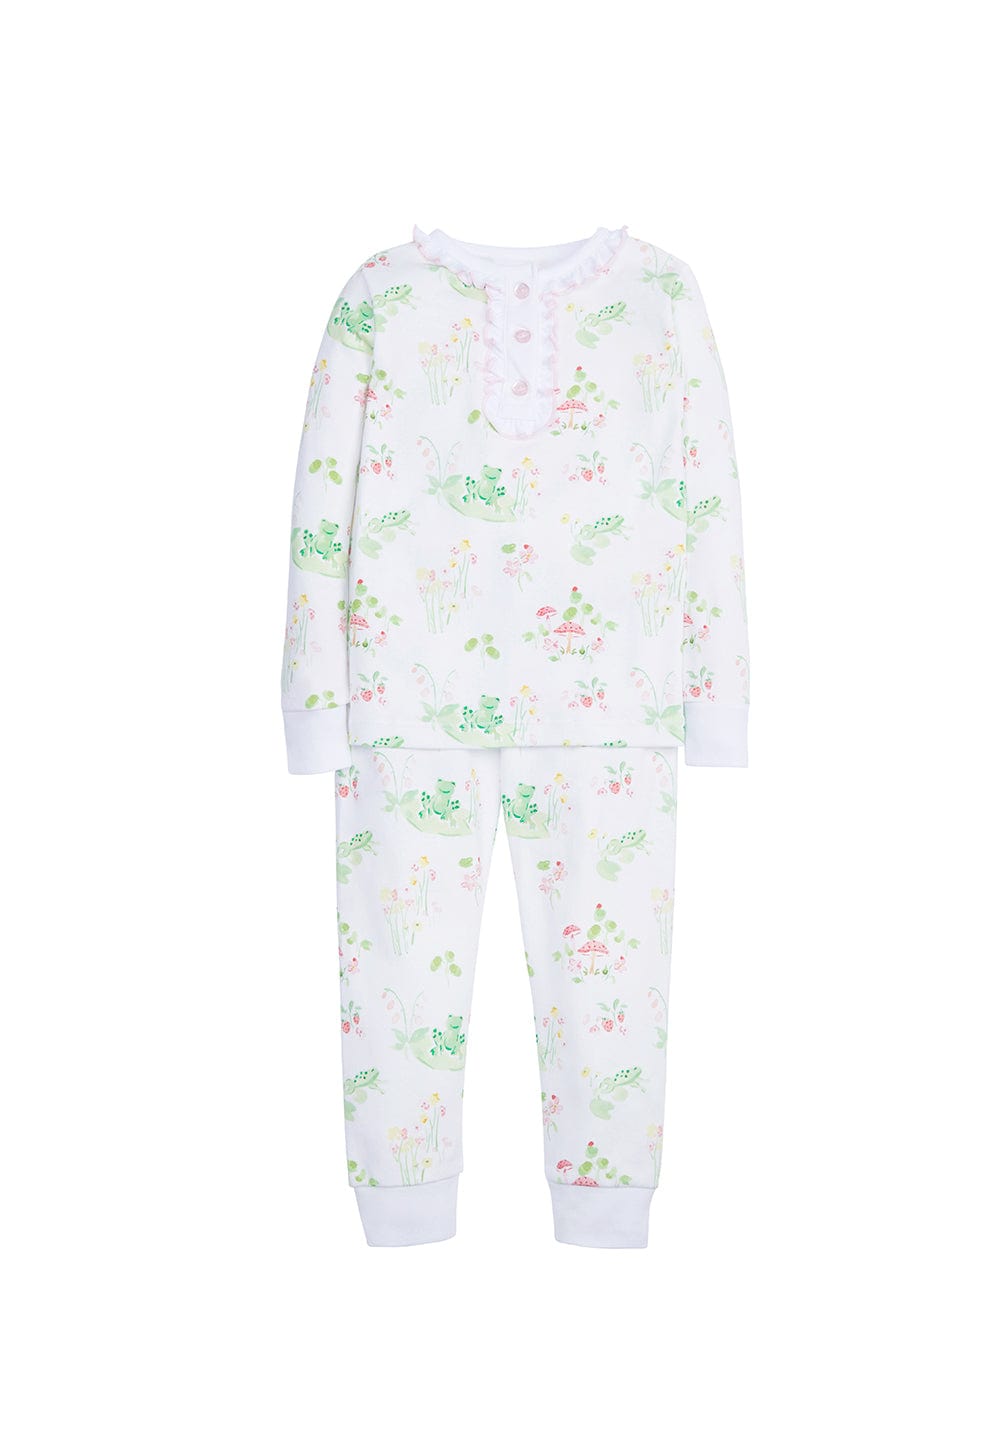 classic childrens clothing girls printed jammies set with frog print